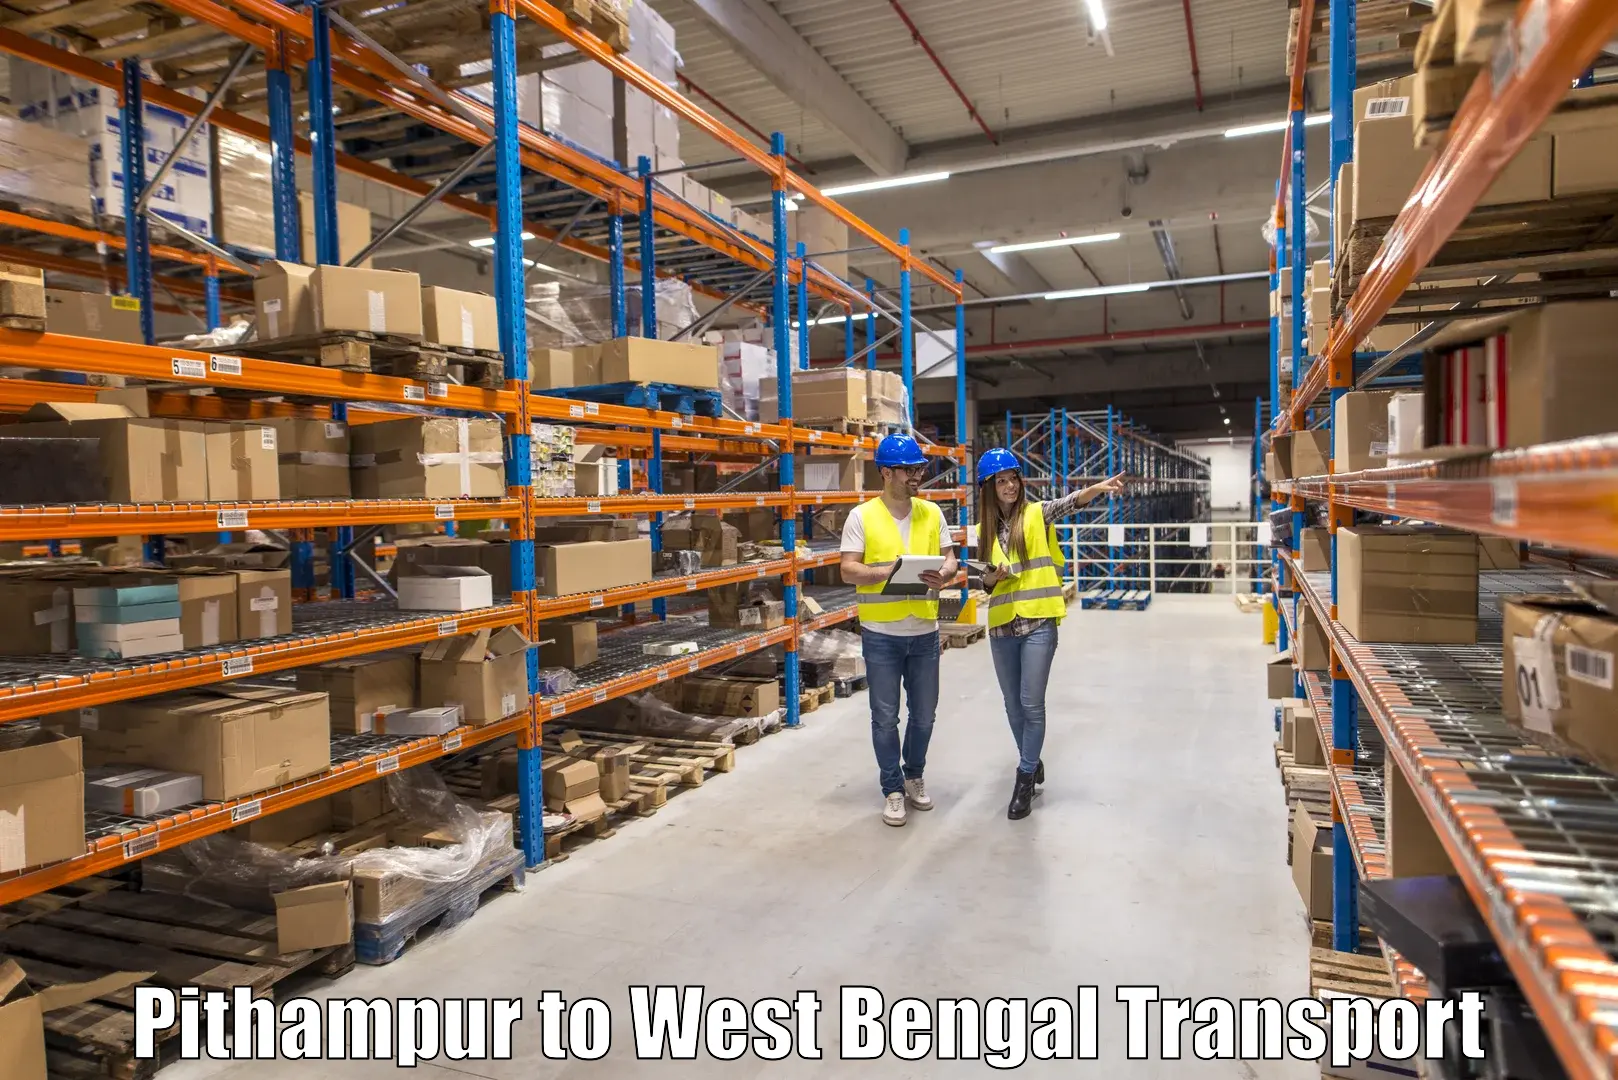 Shipping partner Pithampur to West Bengal